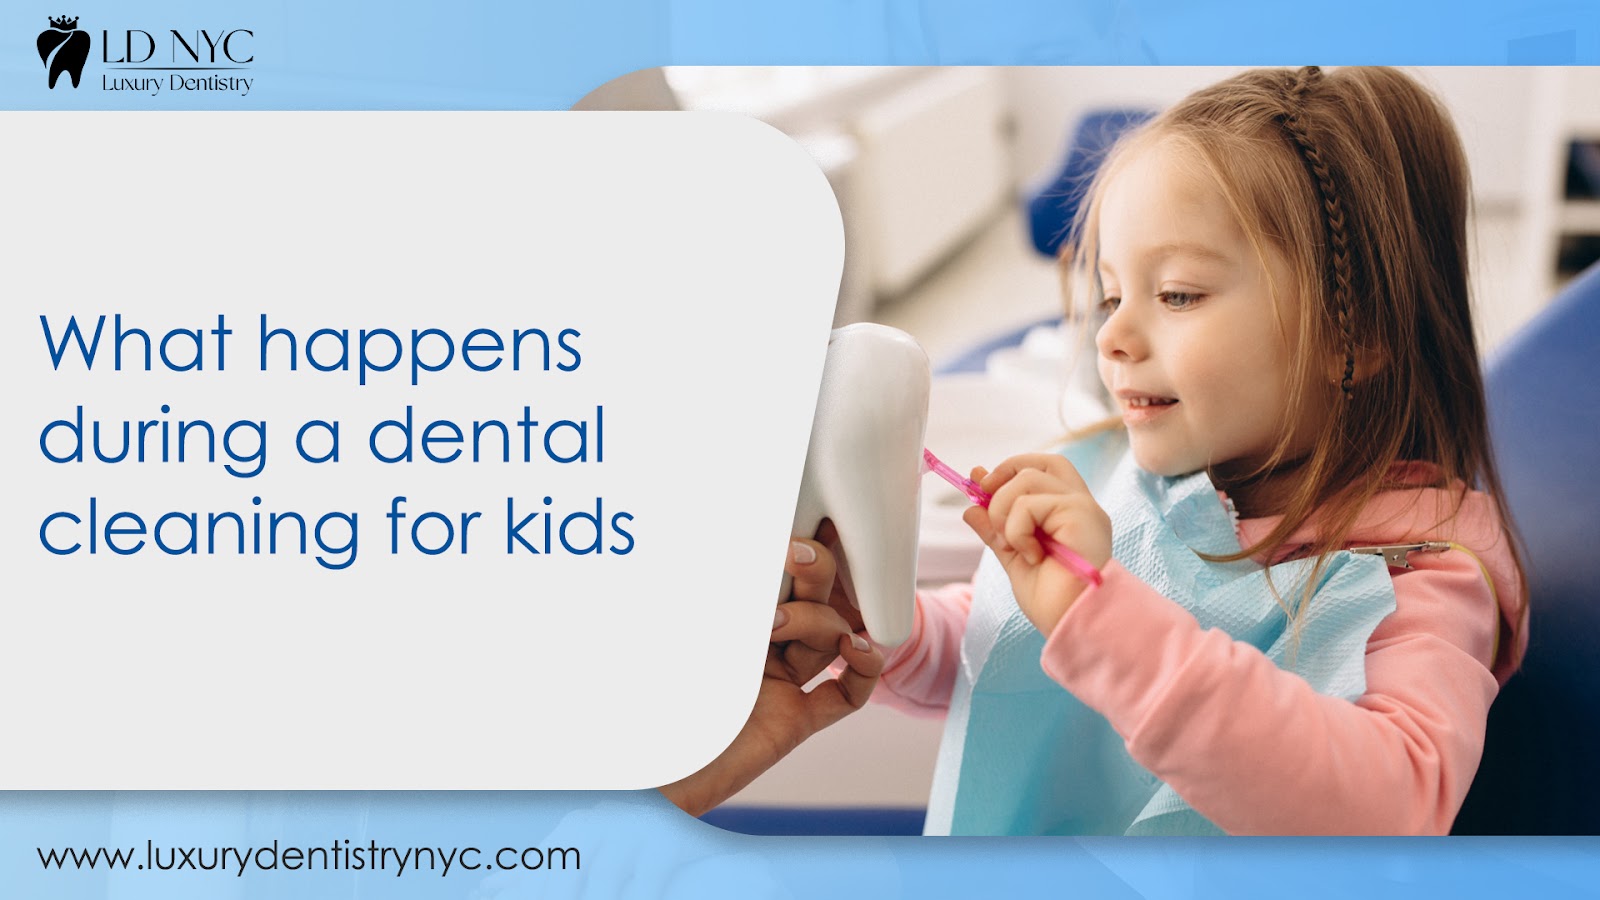 What happens during a dental cleaning for kids